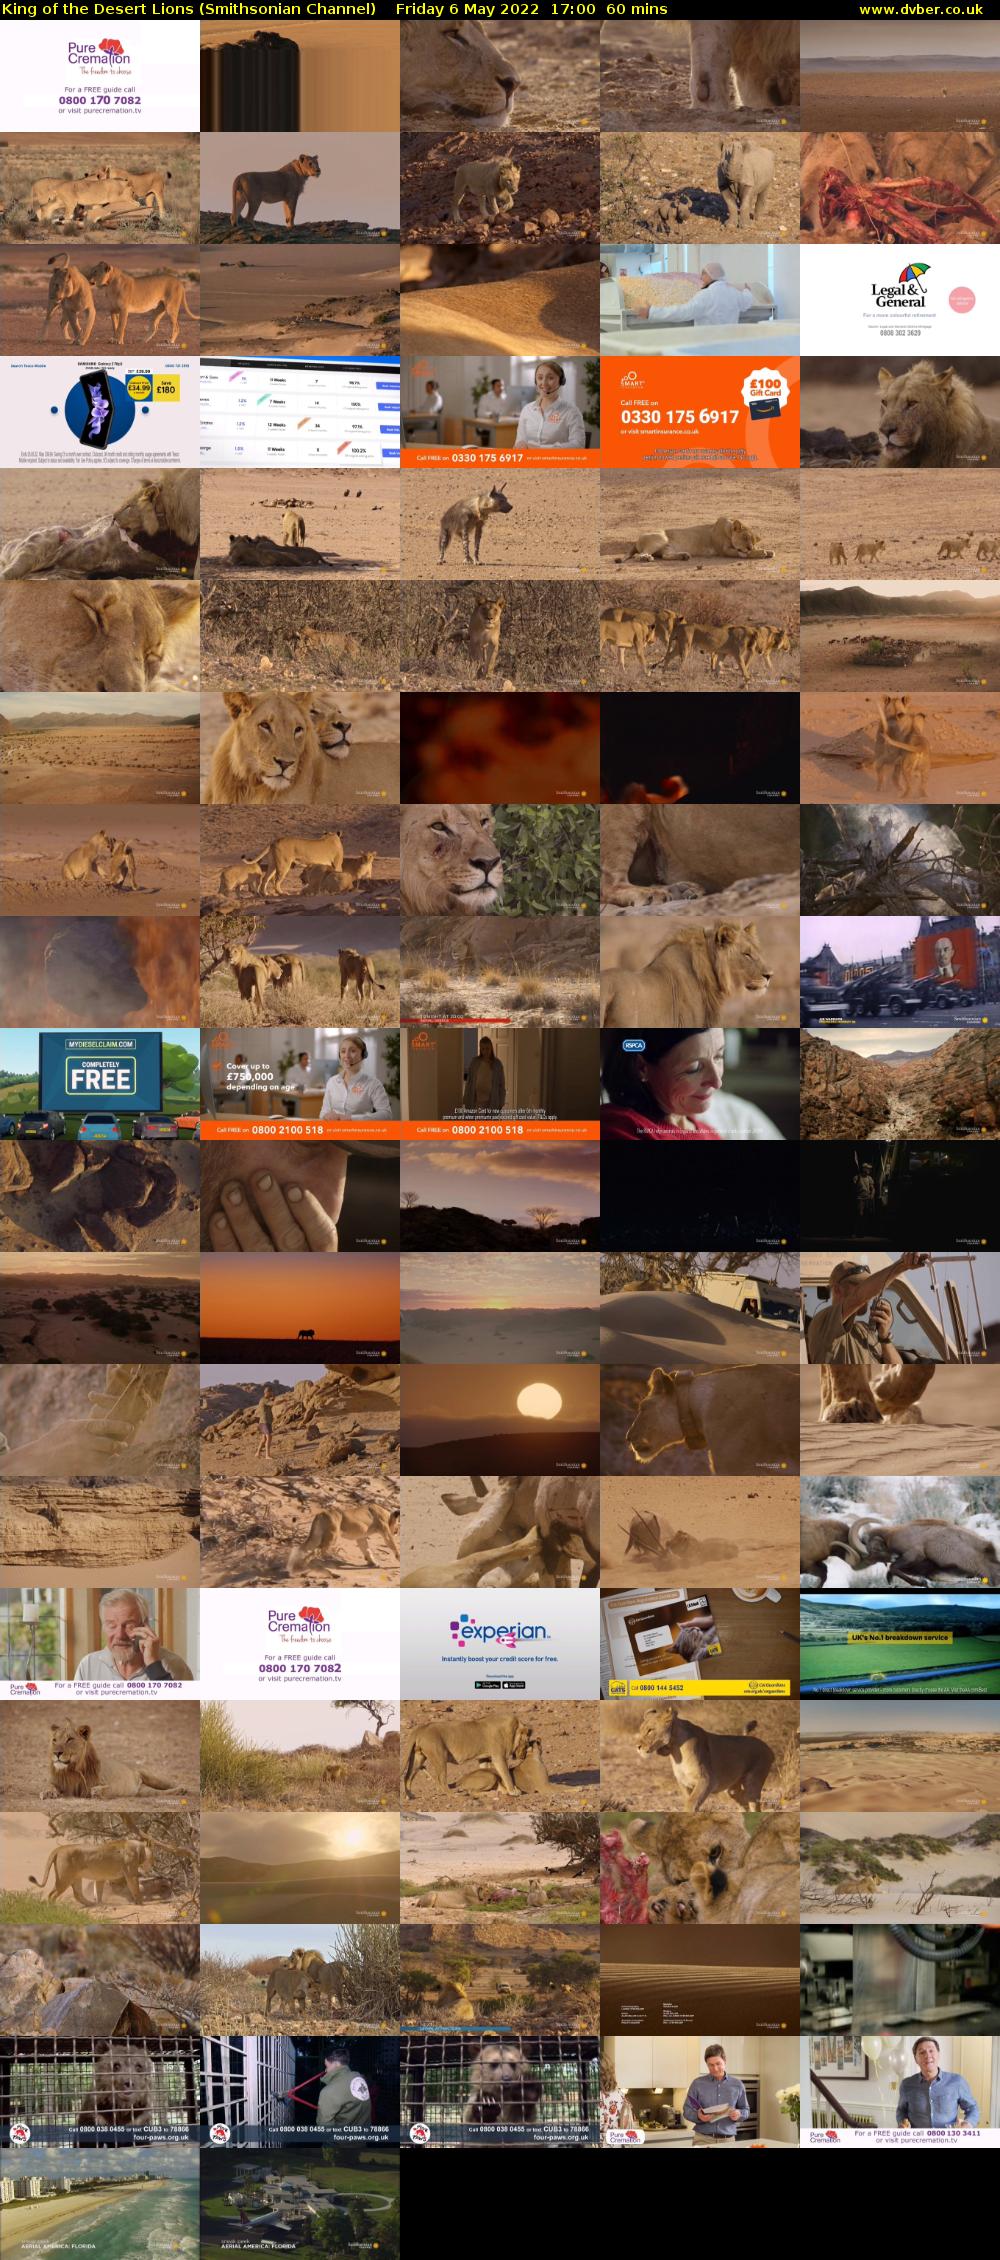 King of the Desert Lions (Smithsonian Channel) Friday 6 May 2022 17:00 - 18:00